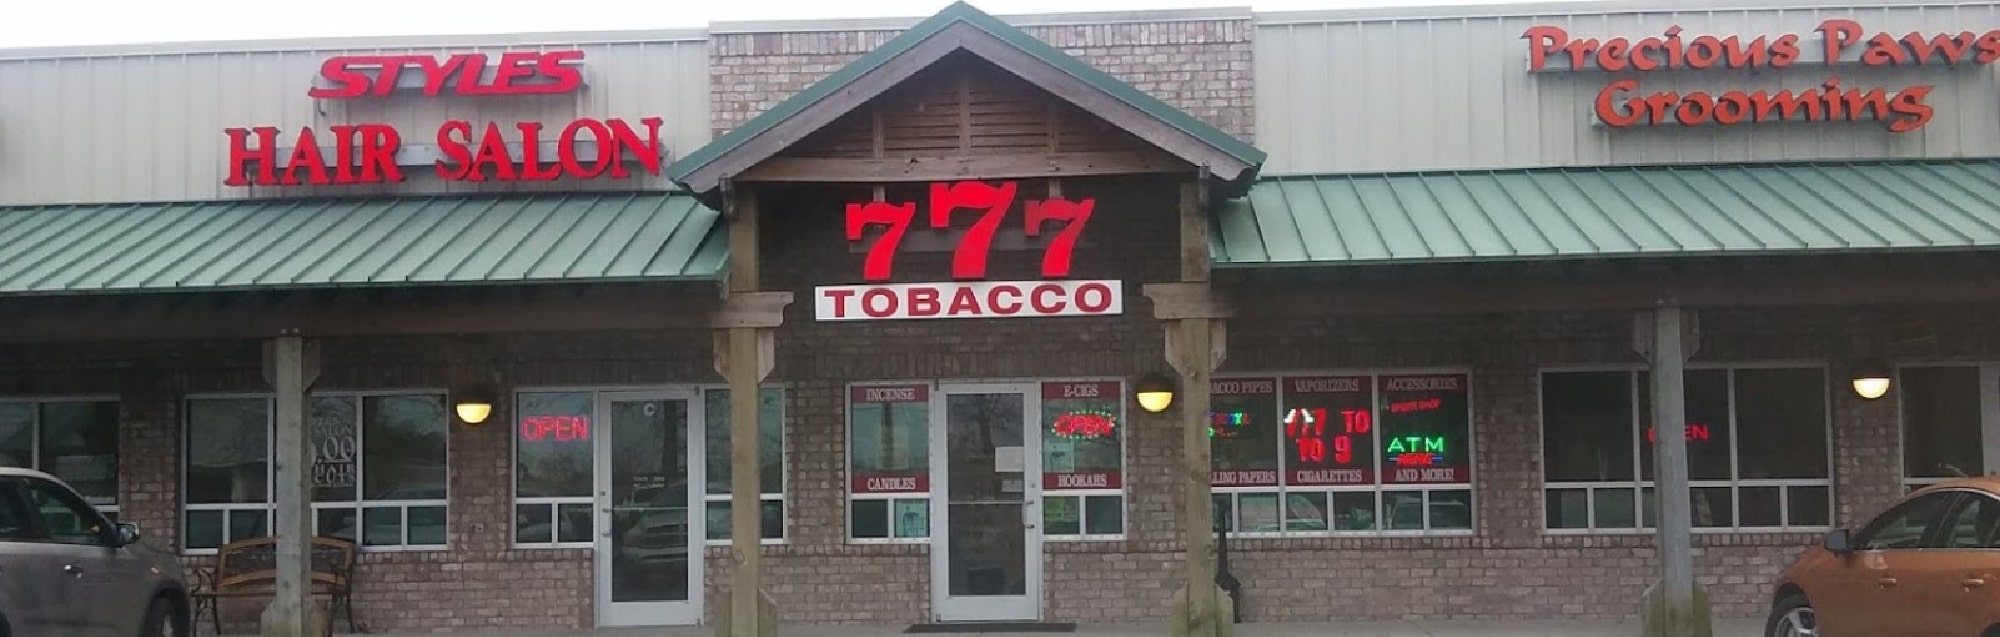 image of 777 tobacco outlet in wilmington nc